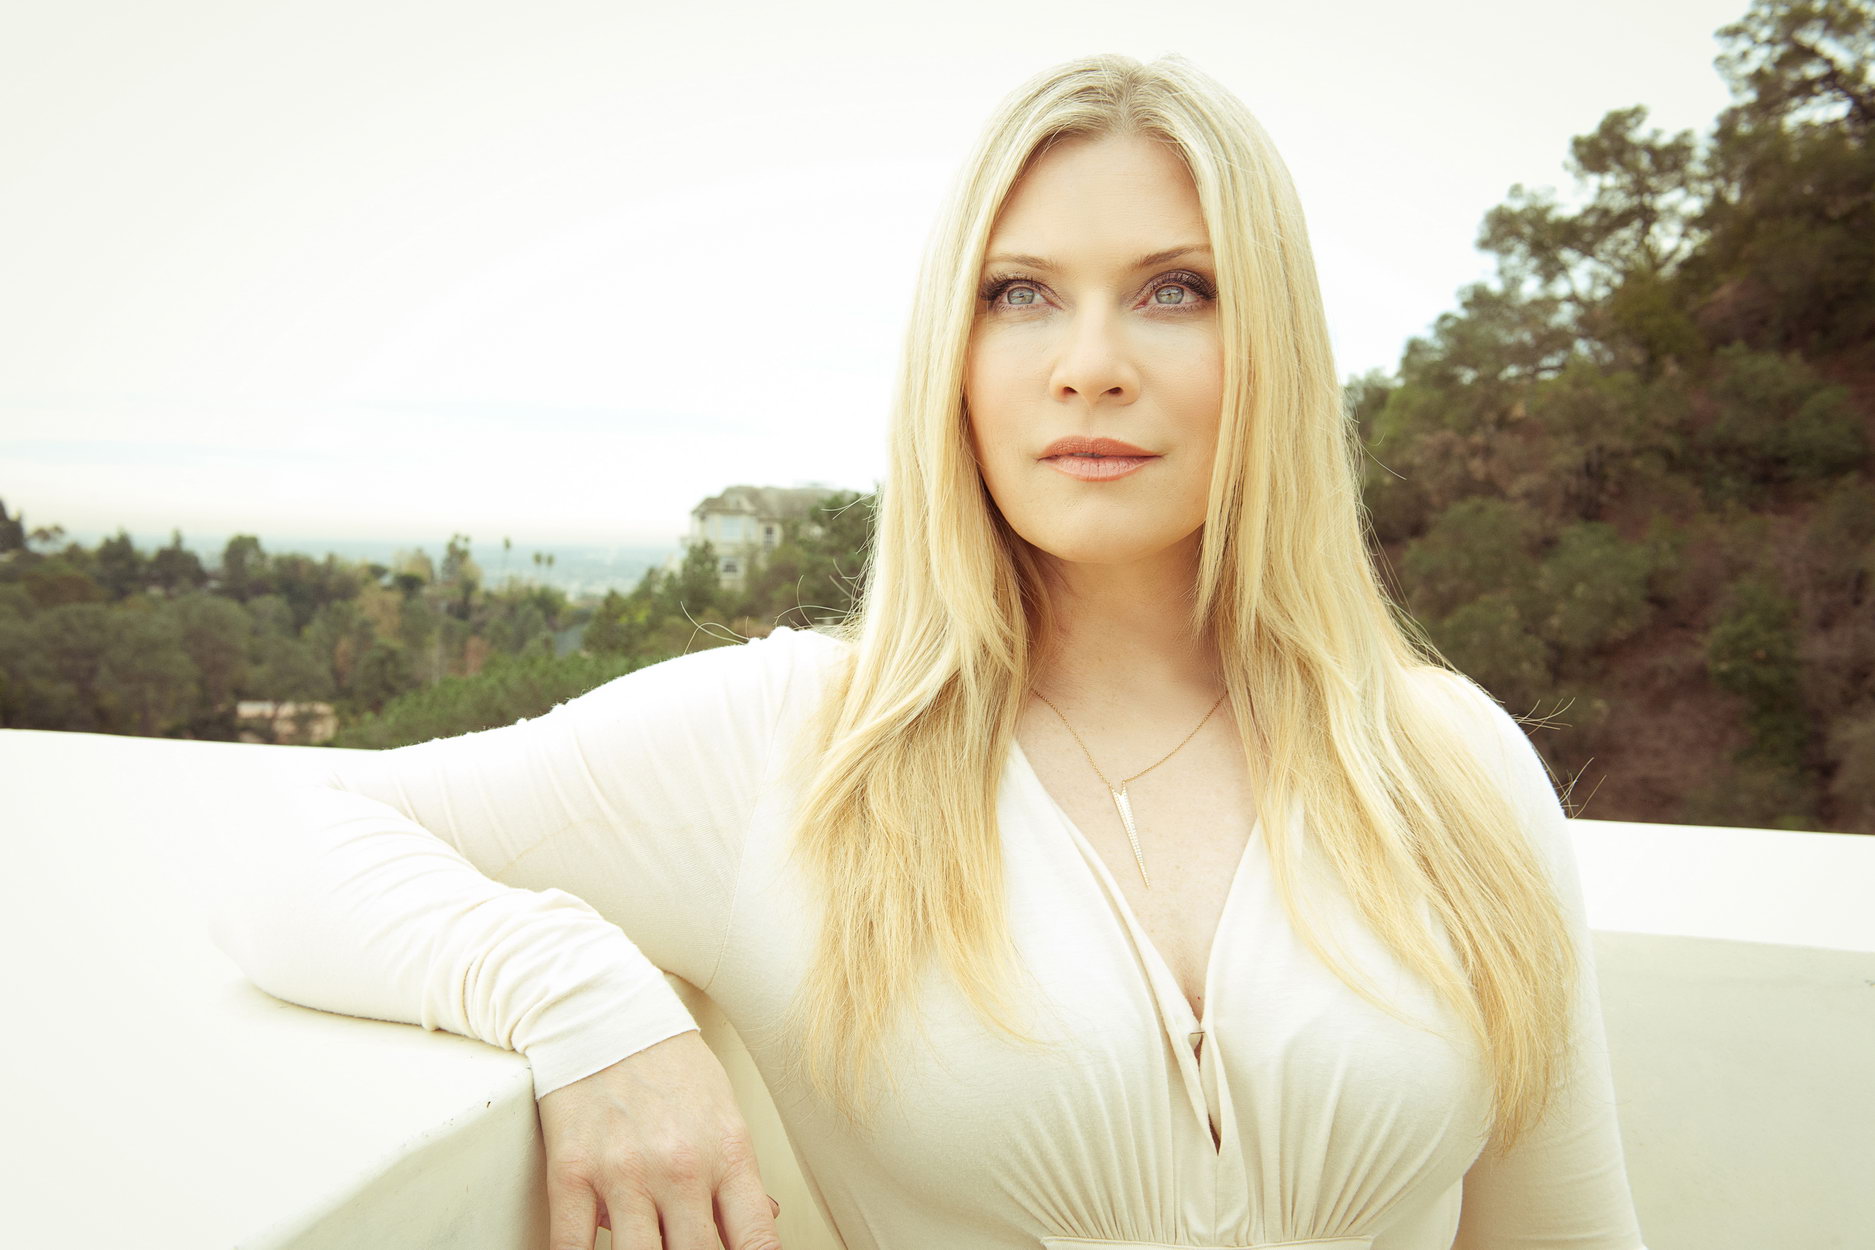 Emily procter poses nude